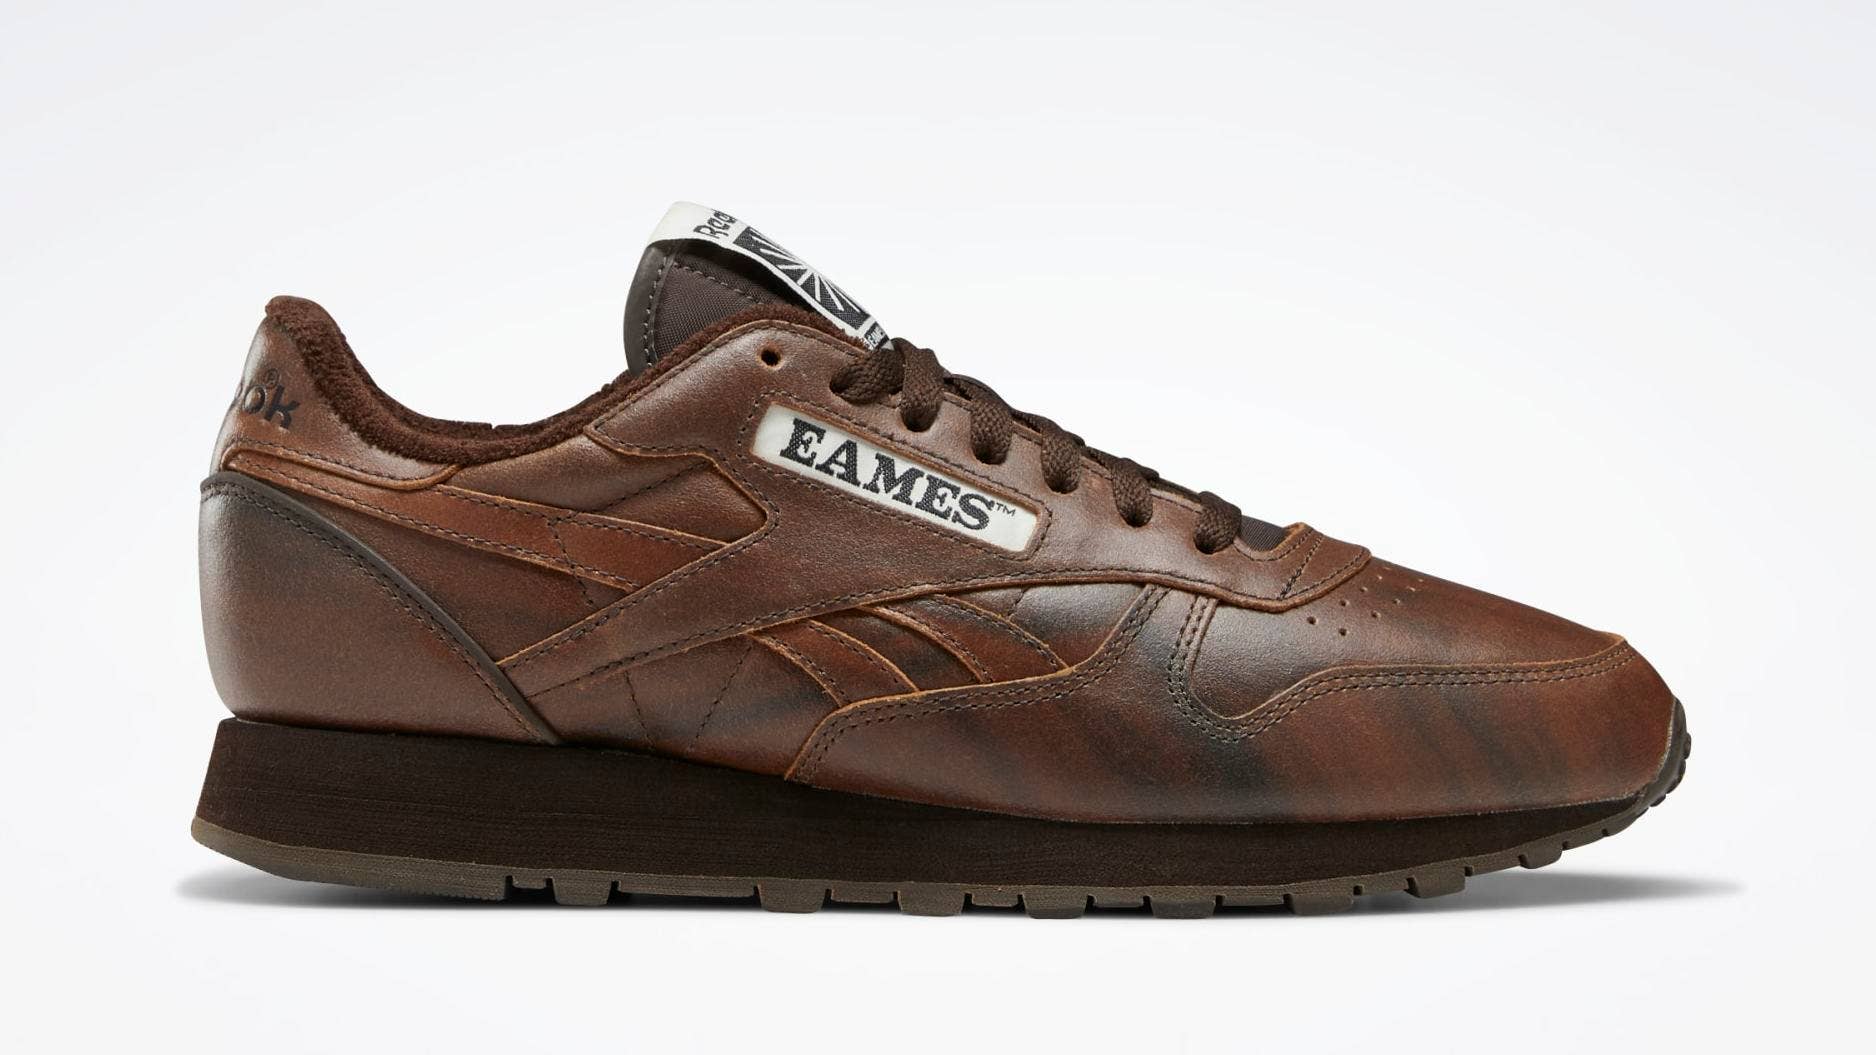 Eames x Reebok Classic Leather 'Rosewood' GY6391 Lateral